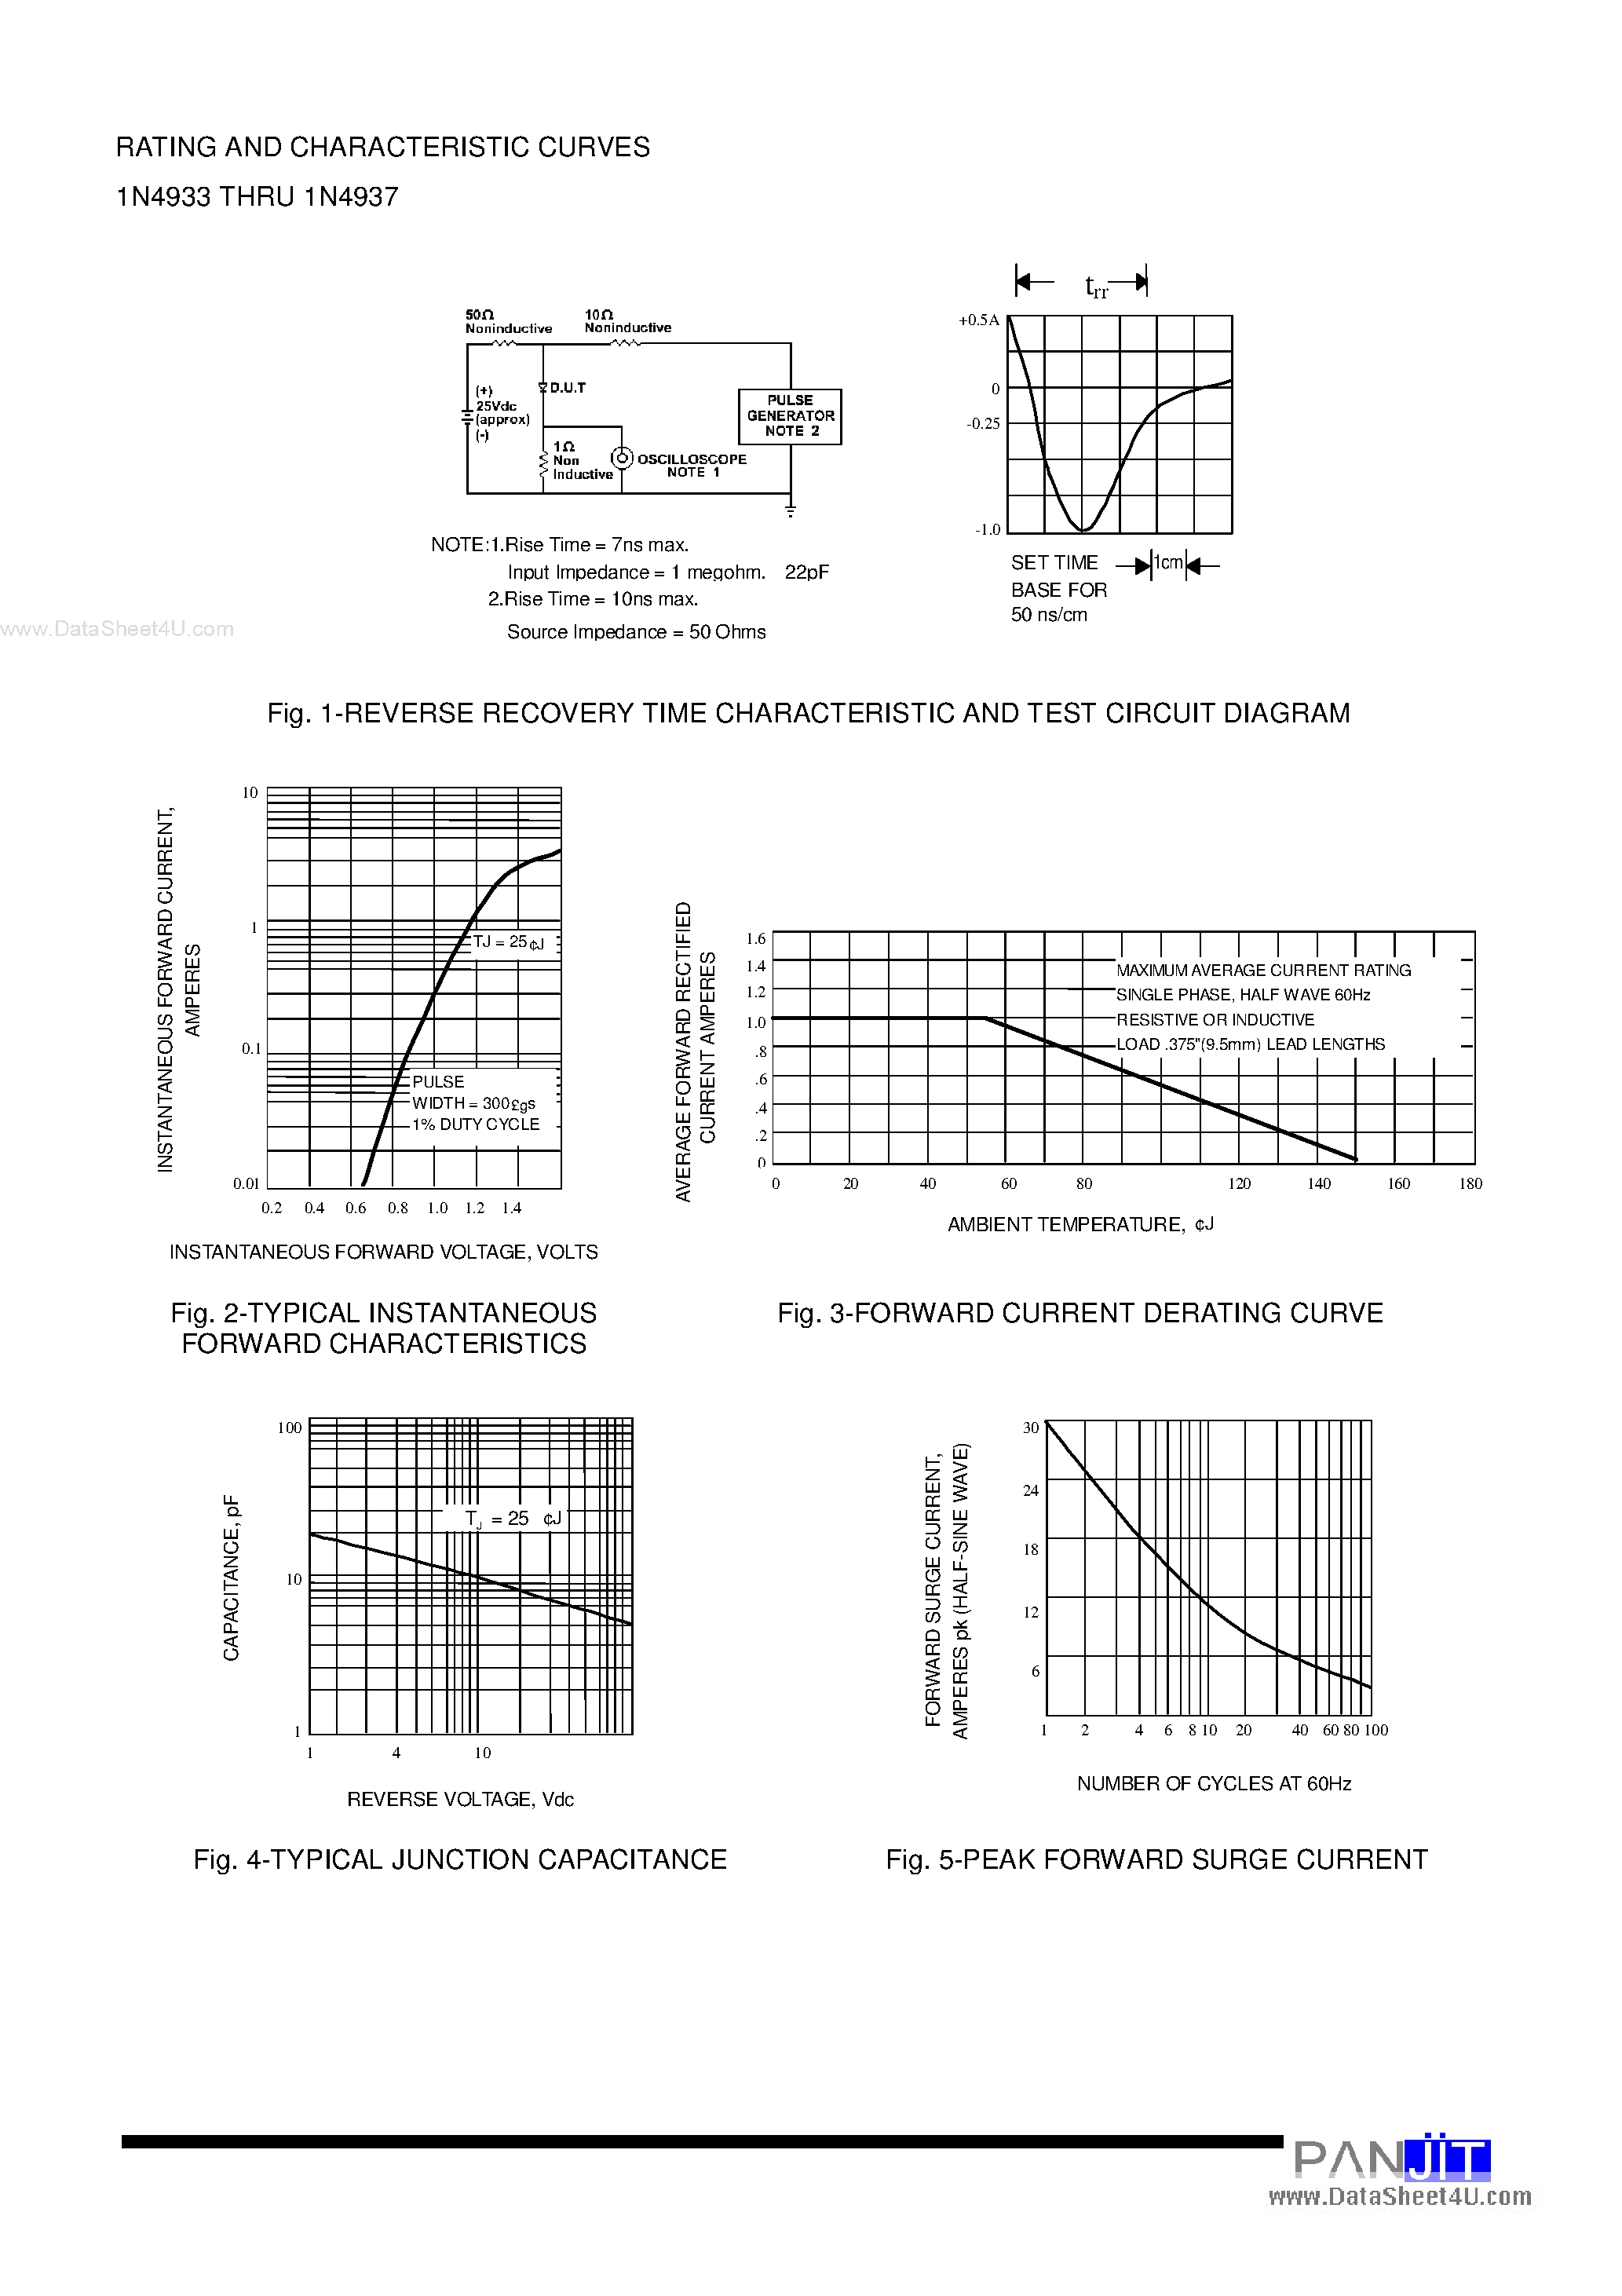 Datasheet IN4933 - (IN4933 - IN4937) FAST SWITCHING PLASTIC RECTIFIER page 2